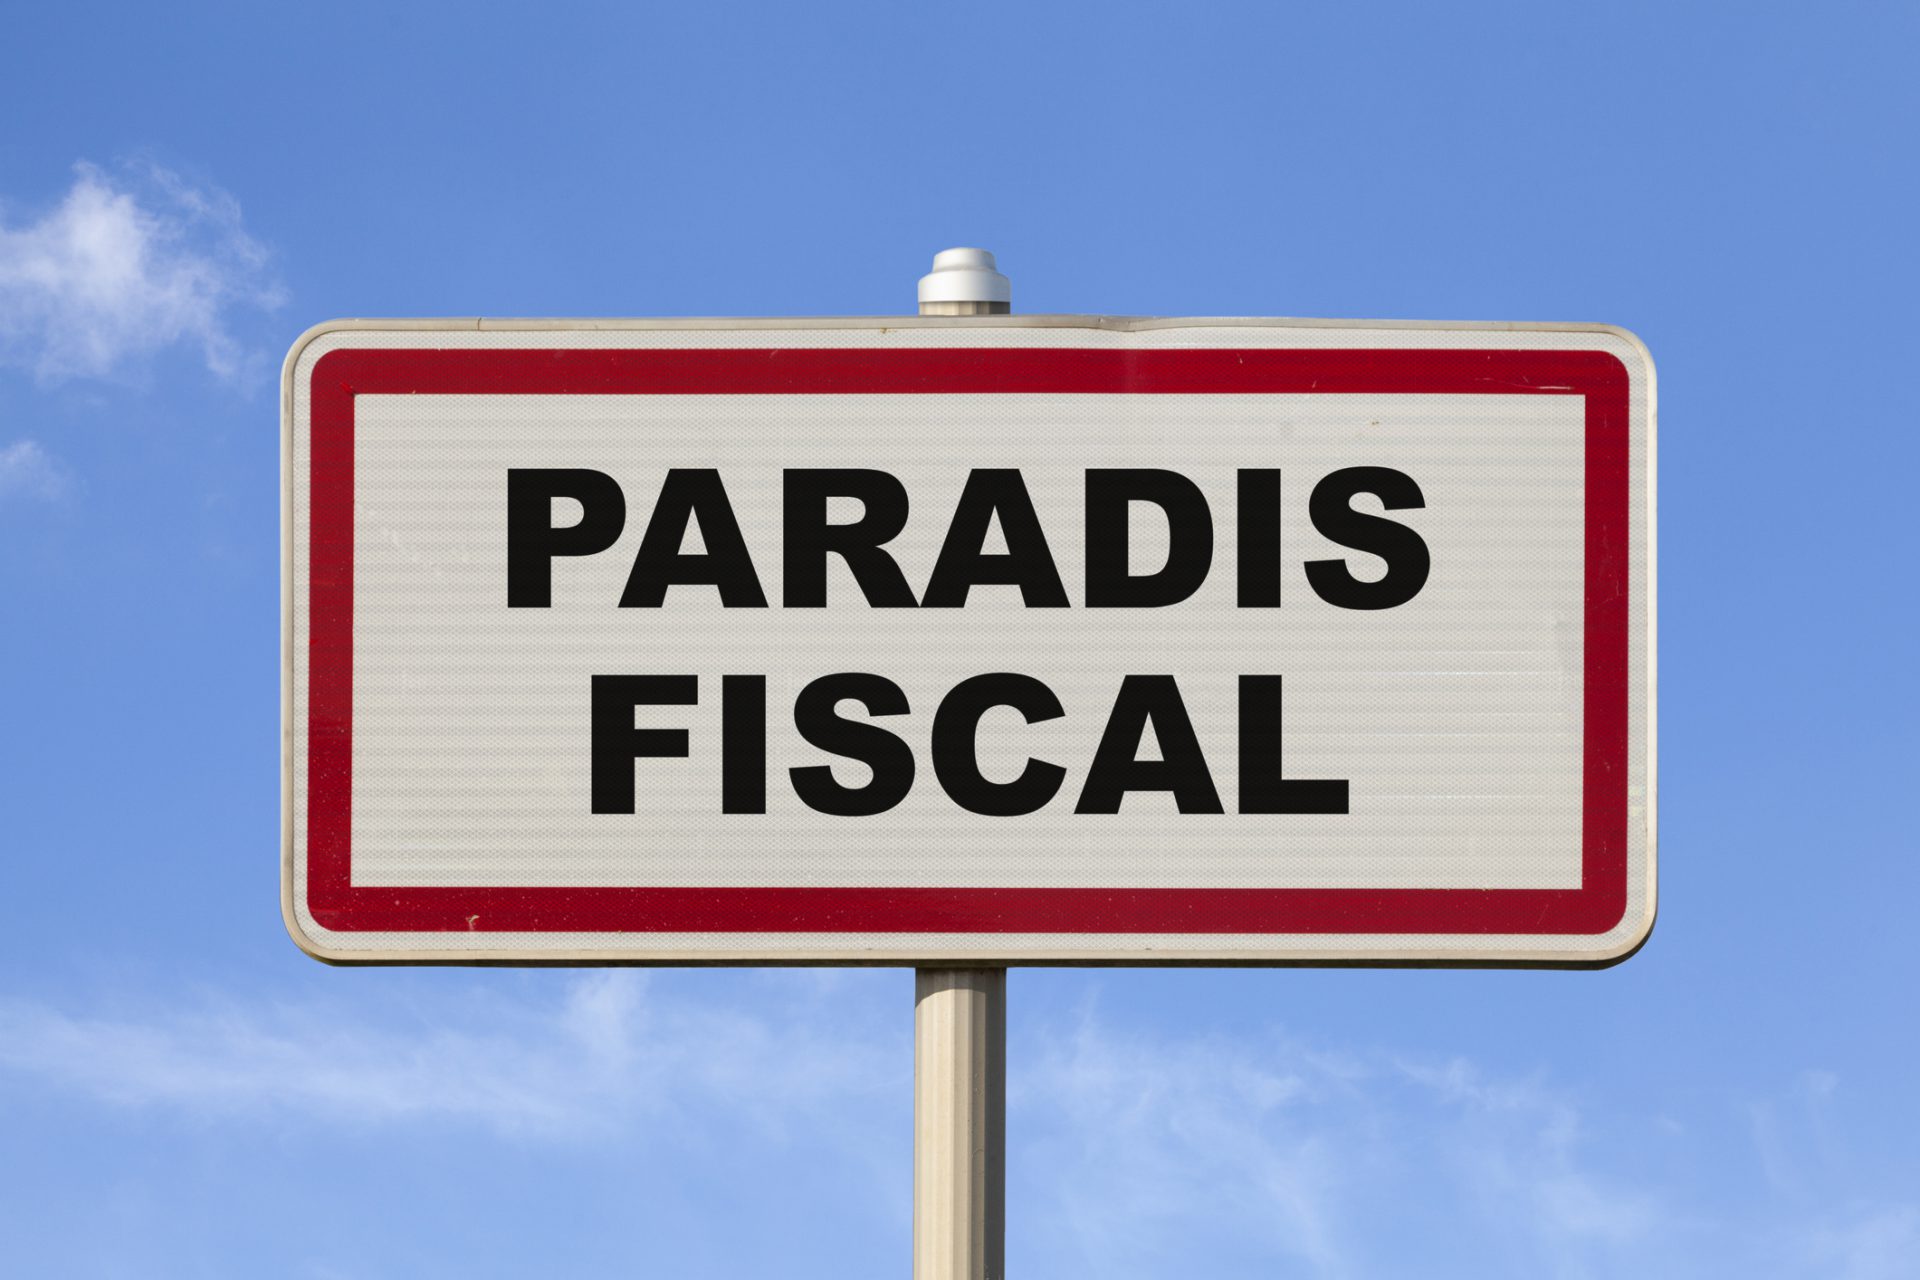 A French entry city sign against a blue sky with written in the middle in French "Paradis fiscal", meaning in English "Tax haven".